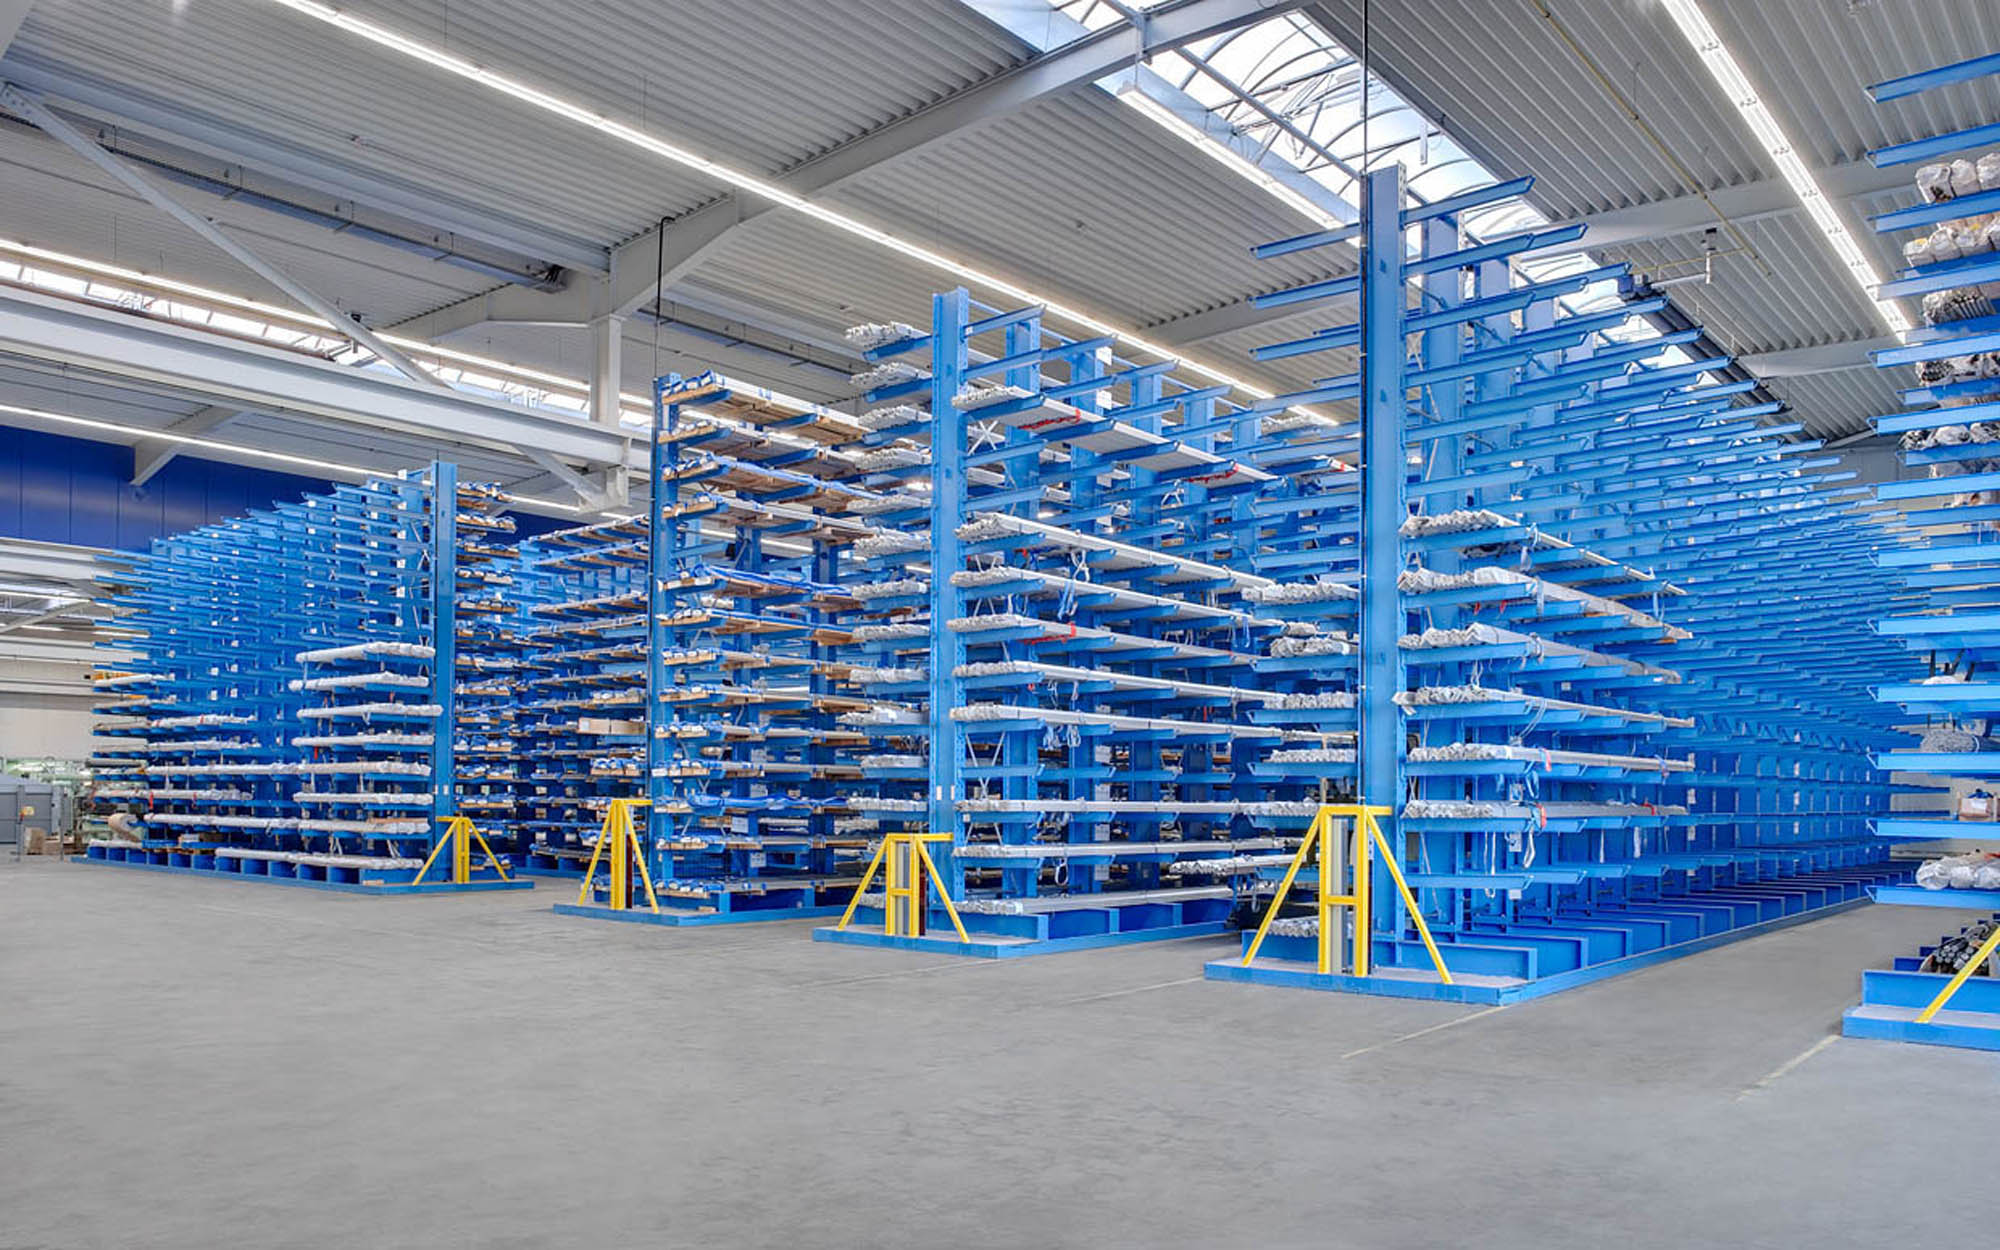 Cantilever racking system for storing steel